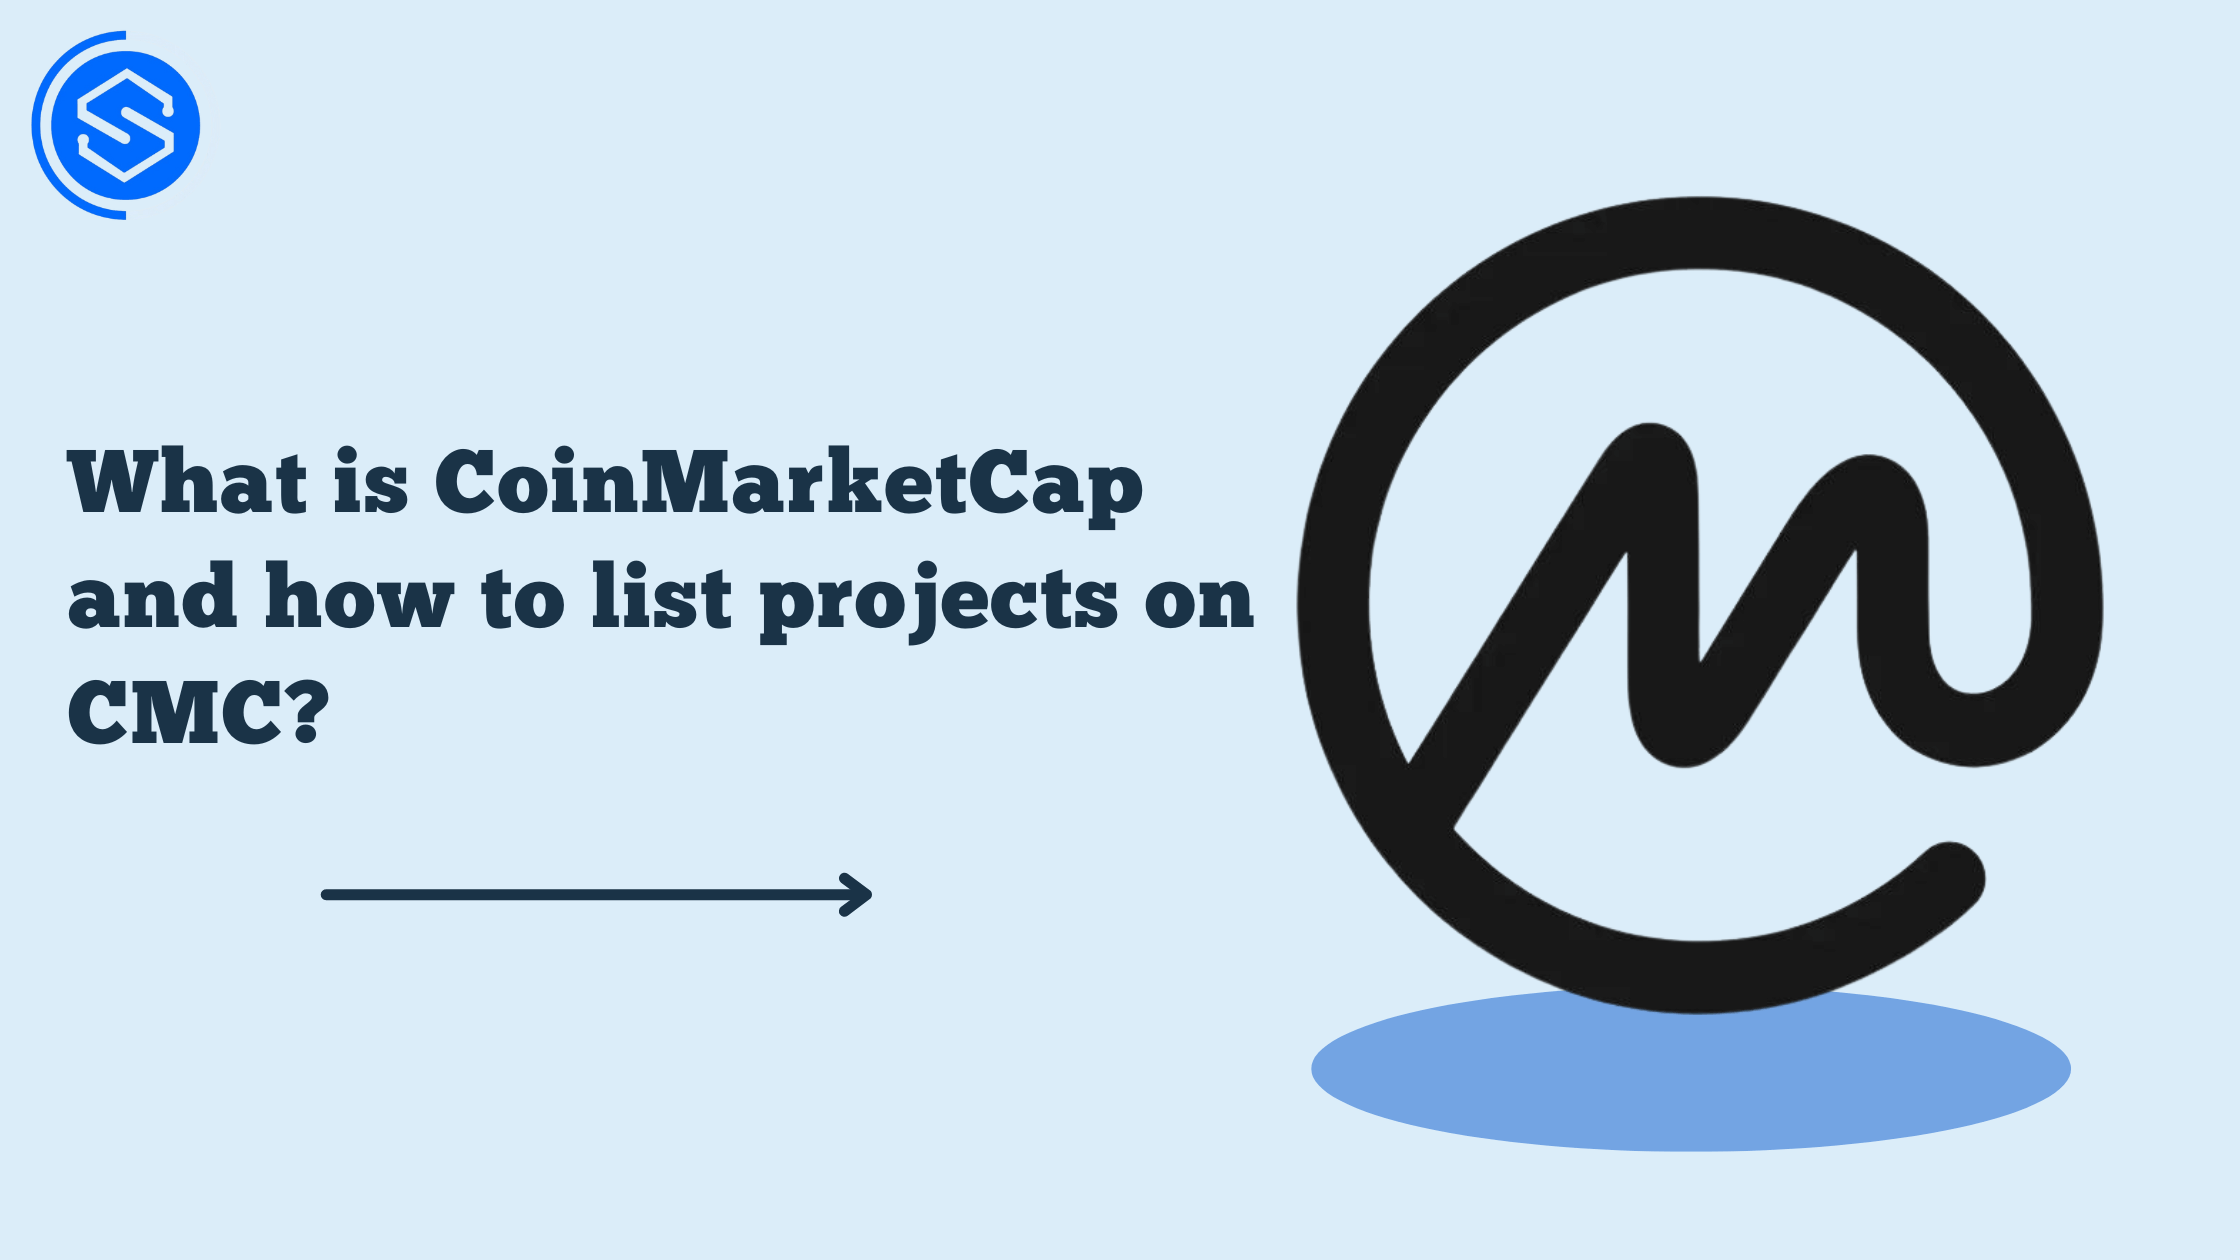 What is CoinMarketCap and how to list projects on CMC?